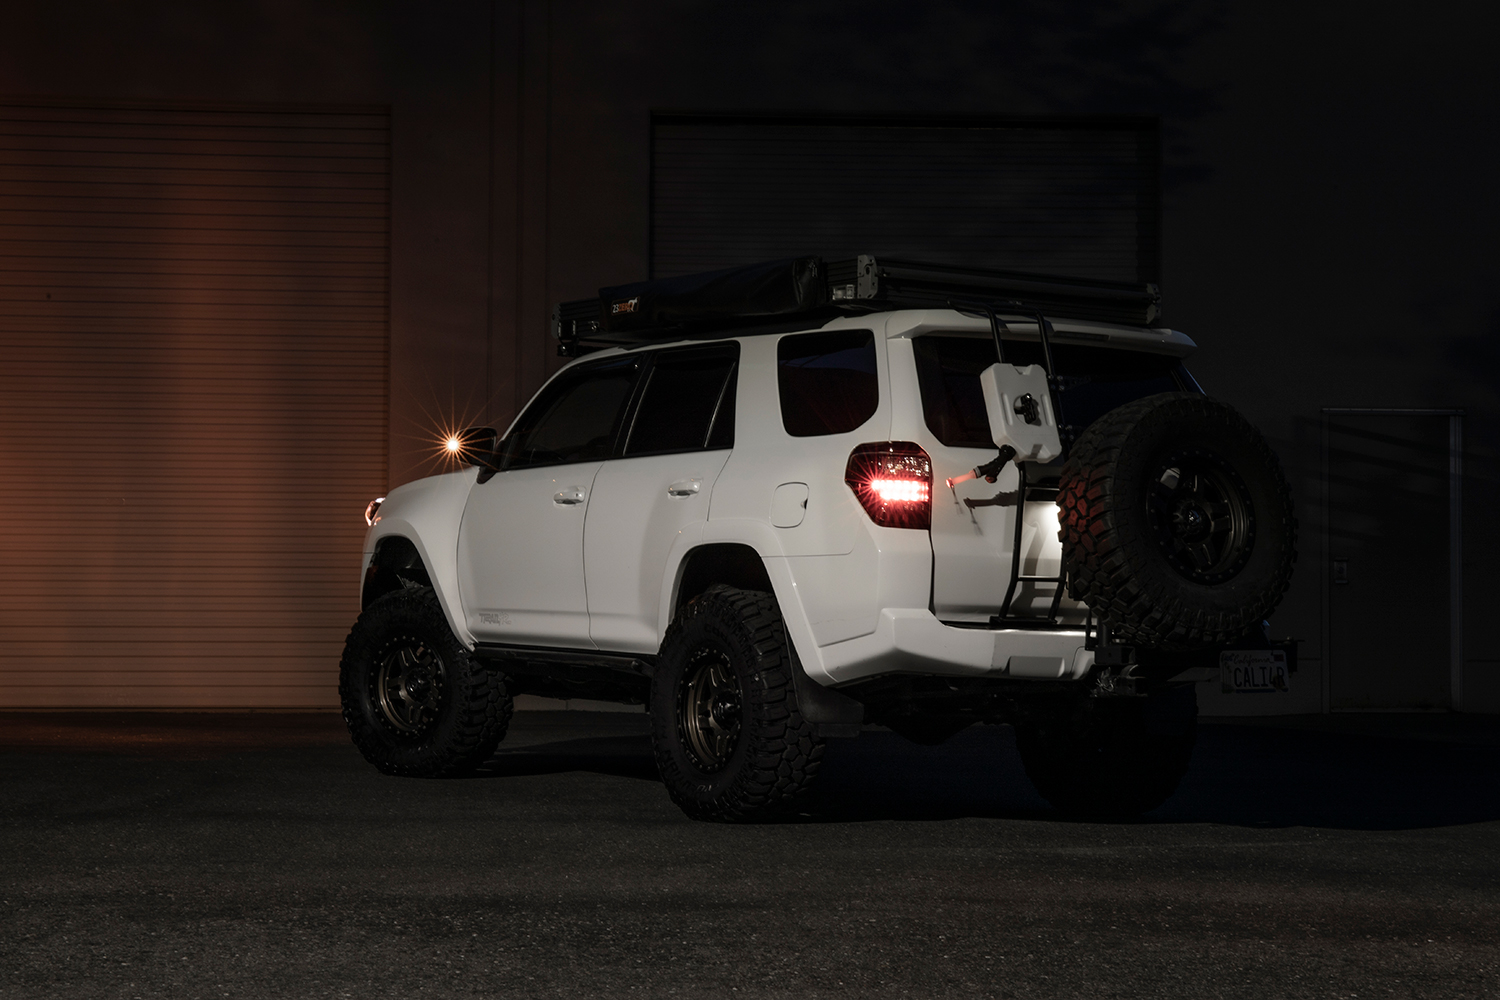 USR DEPO Blackedout Tail Lights for the 5th Gen 4Runner